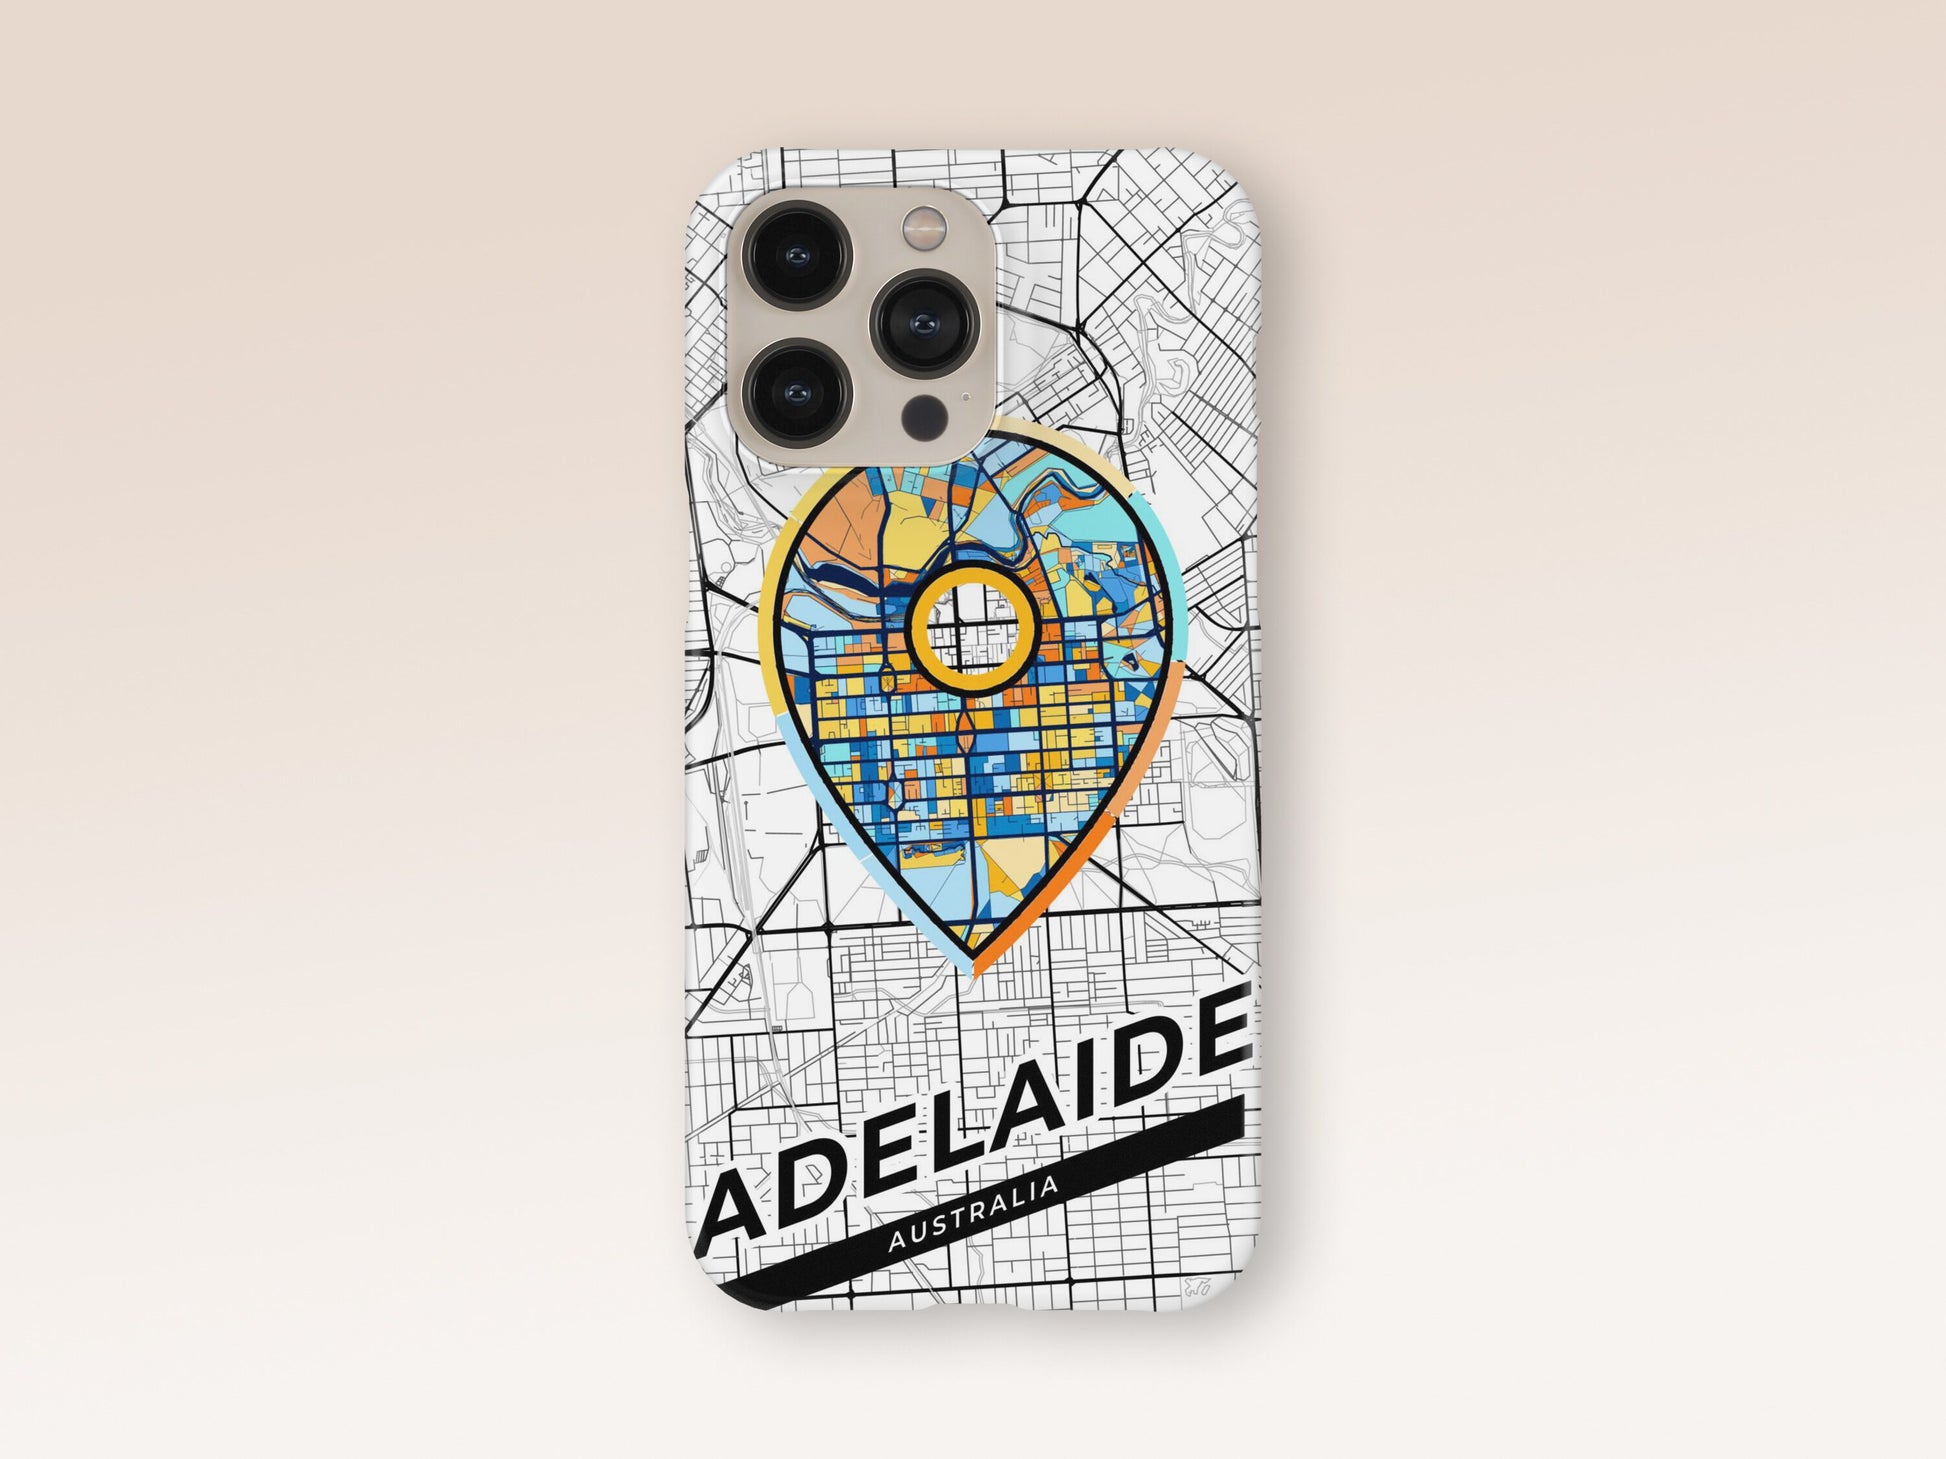 Adelaide Australia slim phone case with colorful icon. Birthday, wedding or housewarming gift. Couple match cases. 1